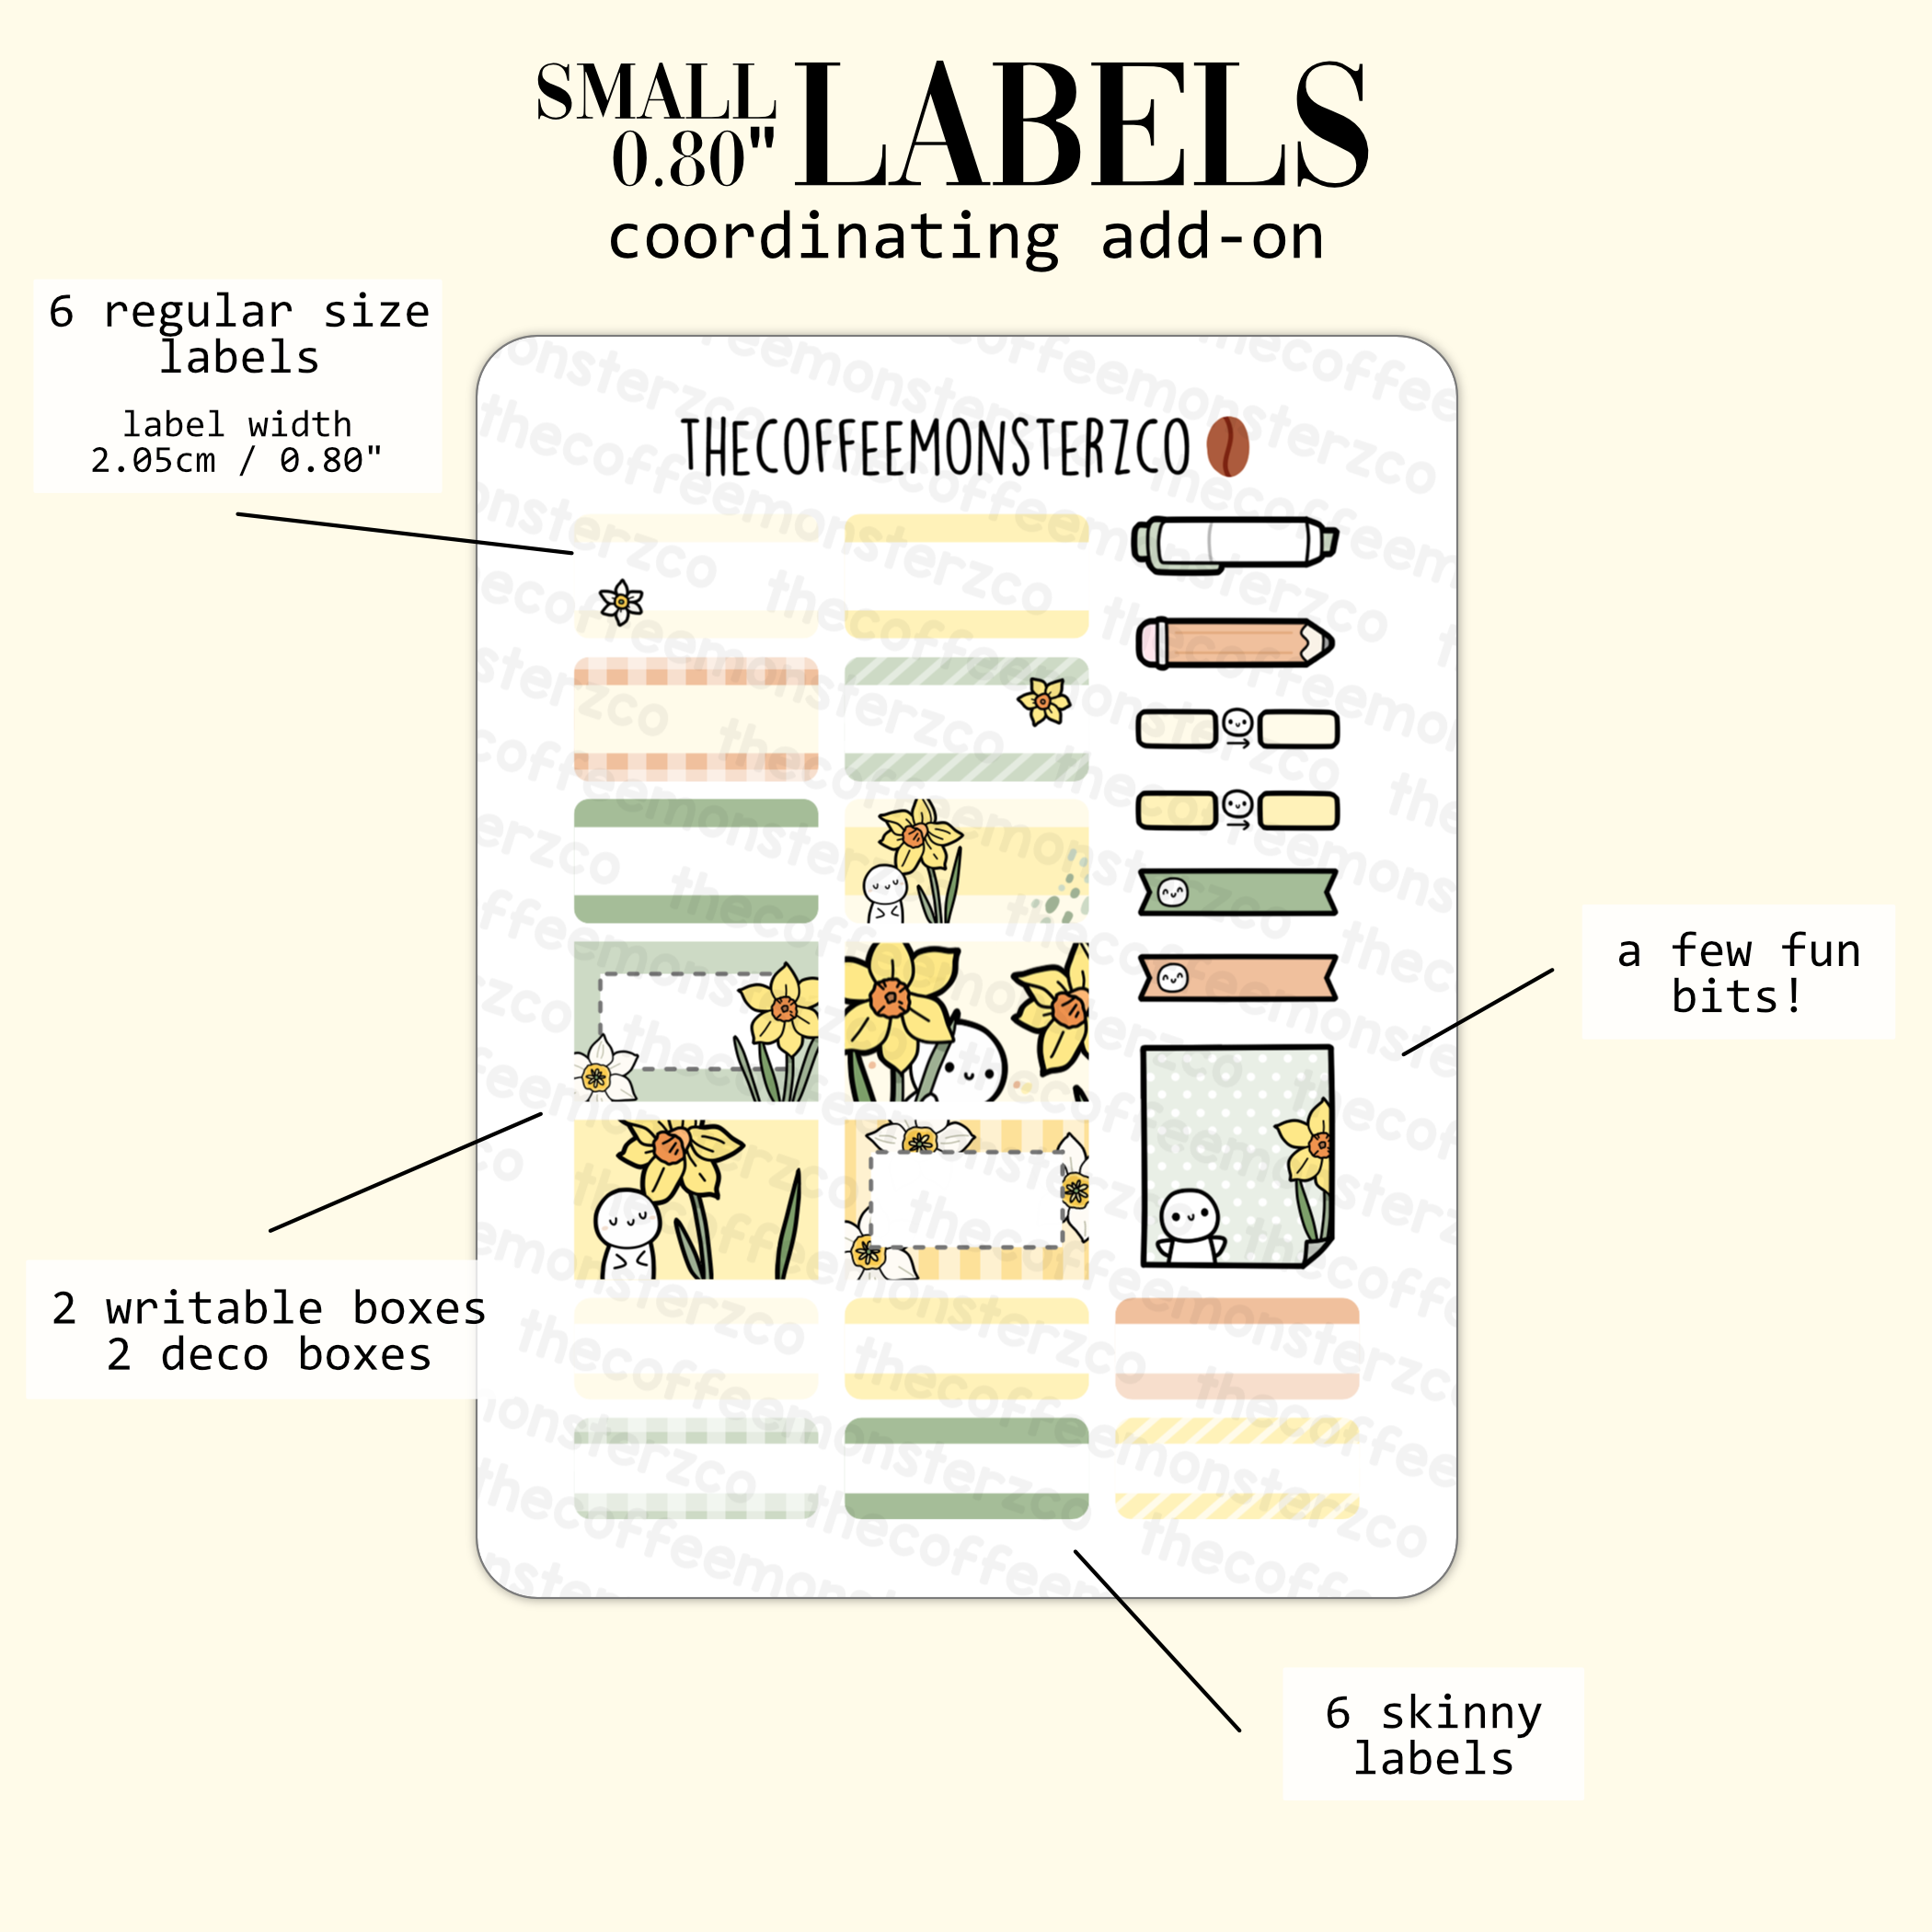 Tiny Custom Stickers, Small Round Sticker Label, Bulletjournal Stickers, Price  Tag Stickers, Small Cute Sticker, Small Stickers for Business 